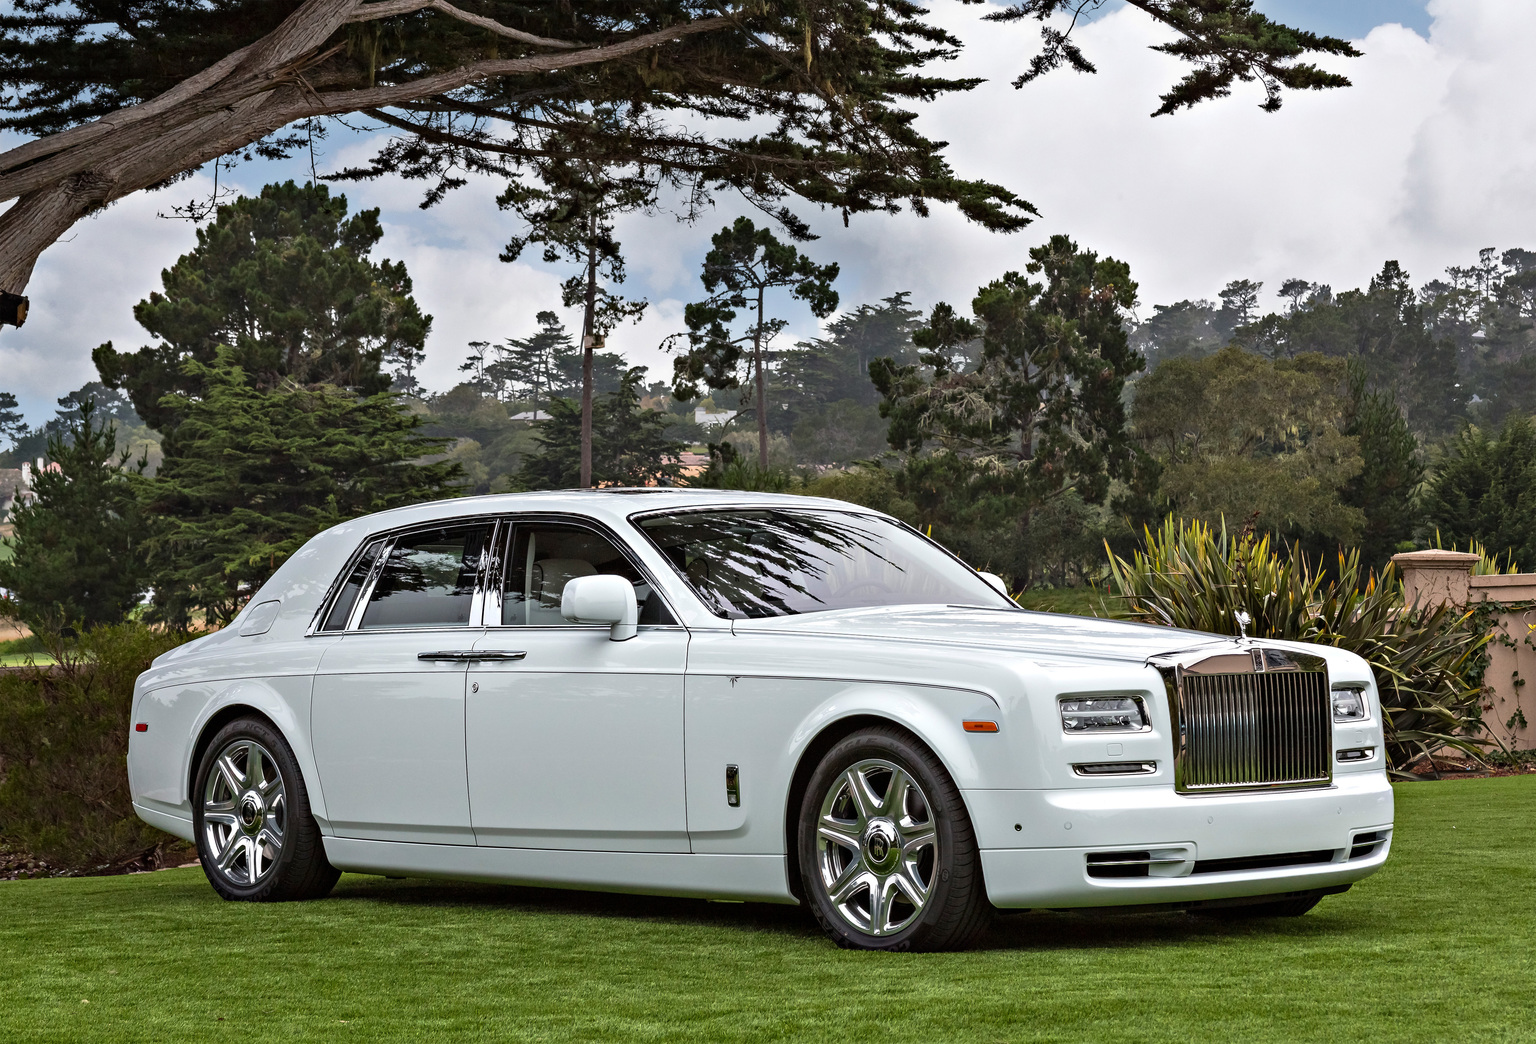 General 1536x1044 car Rolls-Royce luxury cars British cars white cars frontal view grass trees sky clouds vehicle